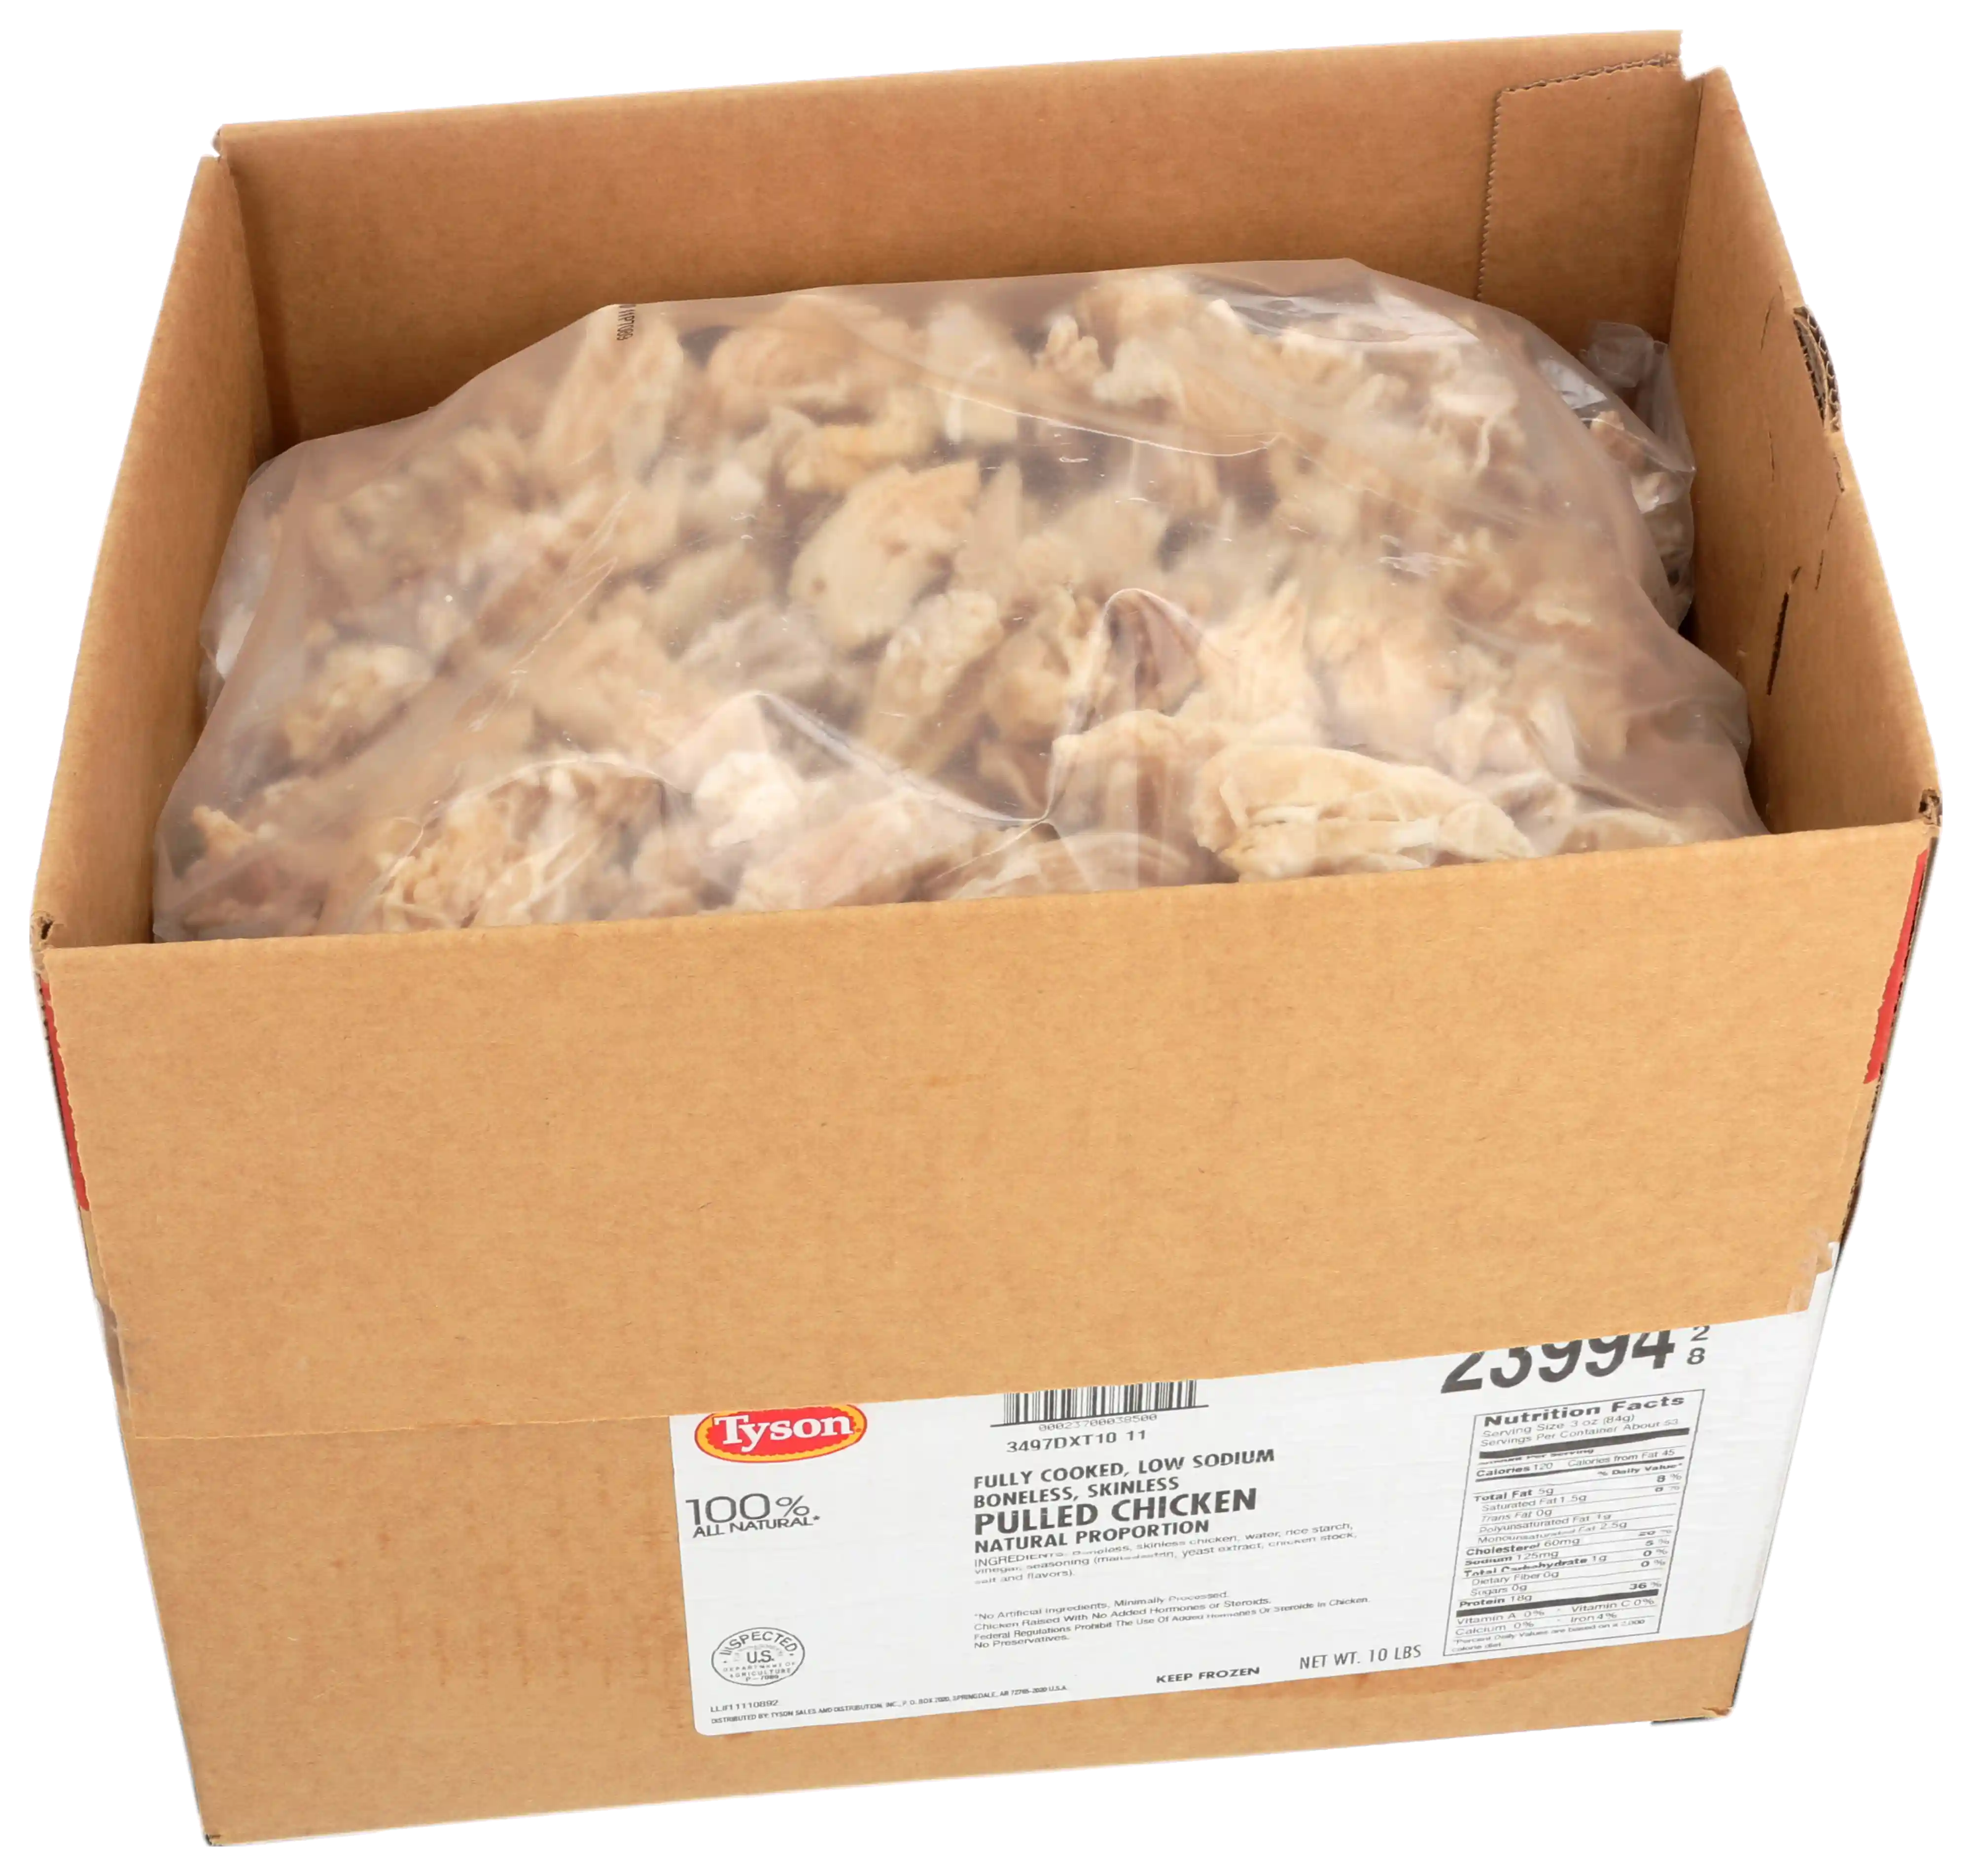 Tyson® Fully Cooked All Natural* Low Sodium Pulled Chicken, Natural Proportion 60 White/40 Dark Meat_image_41